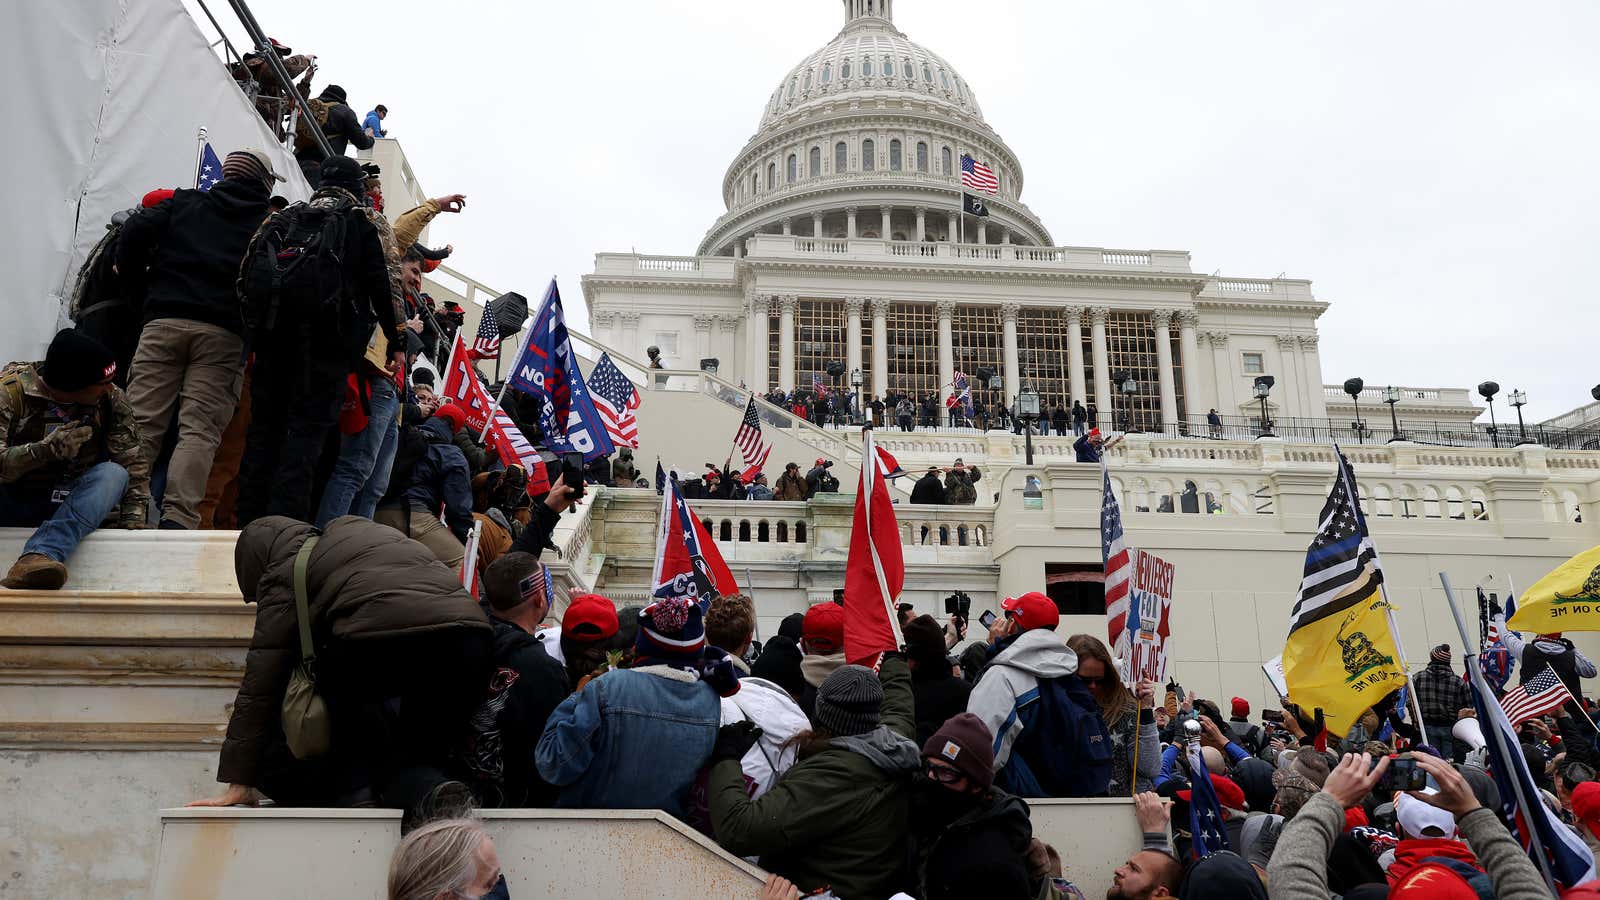 Trump supporters on the steps of the Capitol on Jan 6.